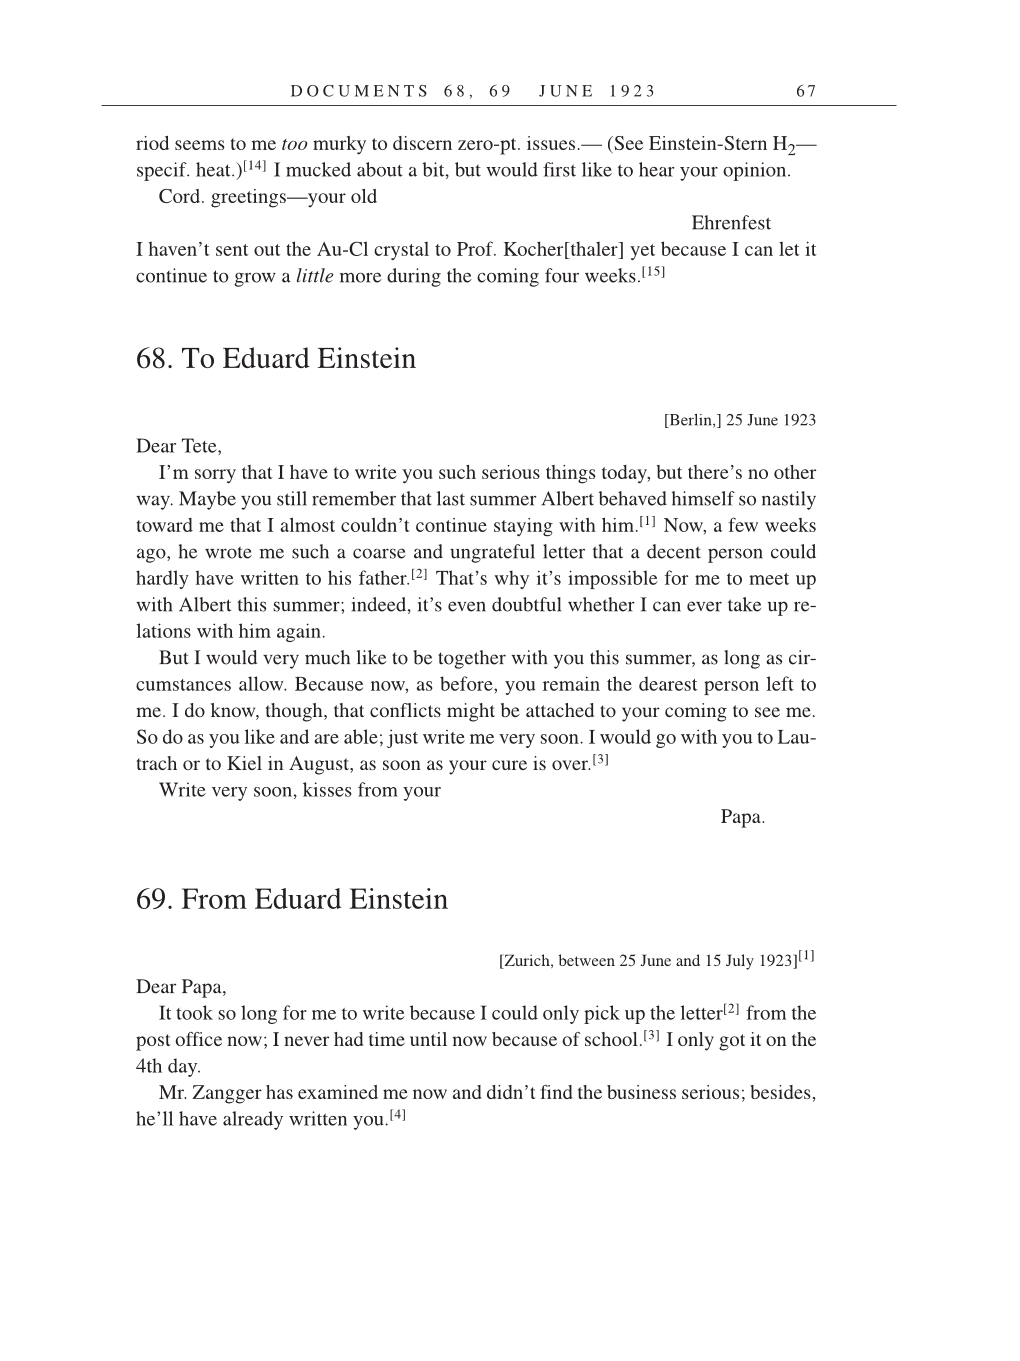 Volume 14: The Berlin Years: Writings & Correspondence, April 1923-May 1925 (English Translation Supplement) page 67